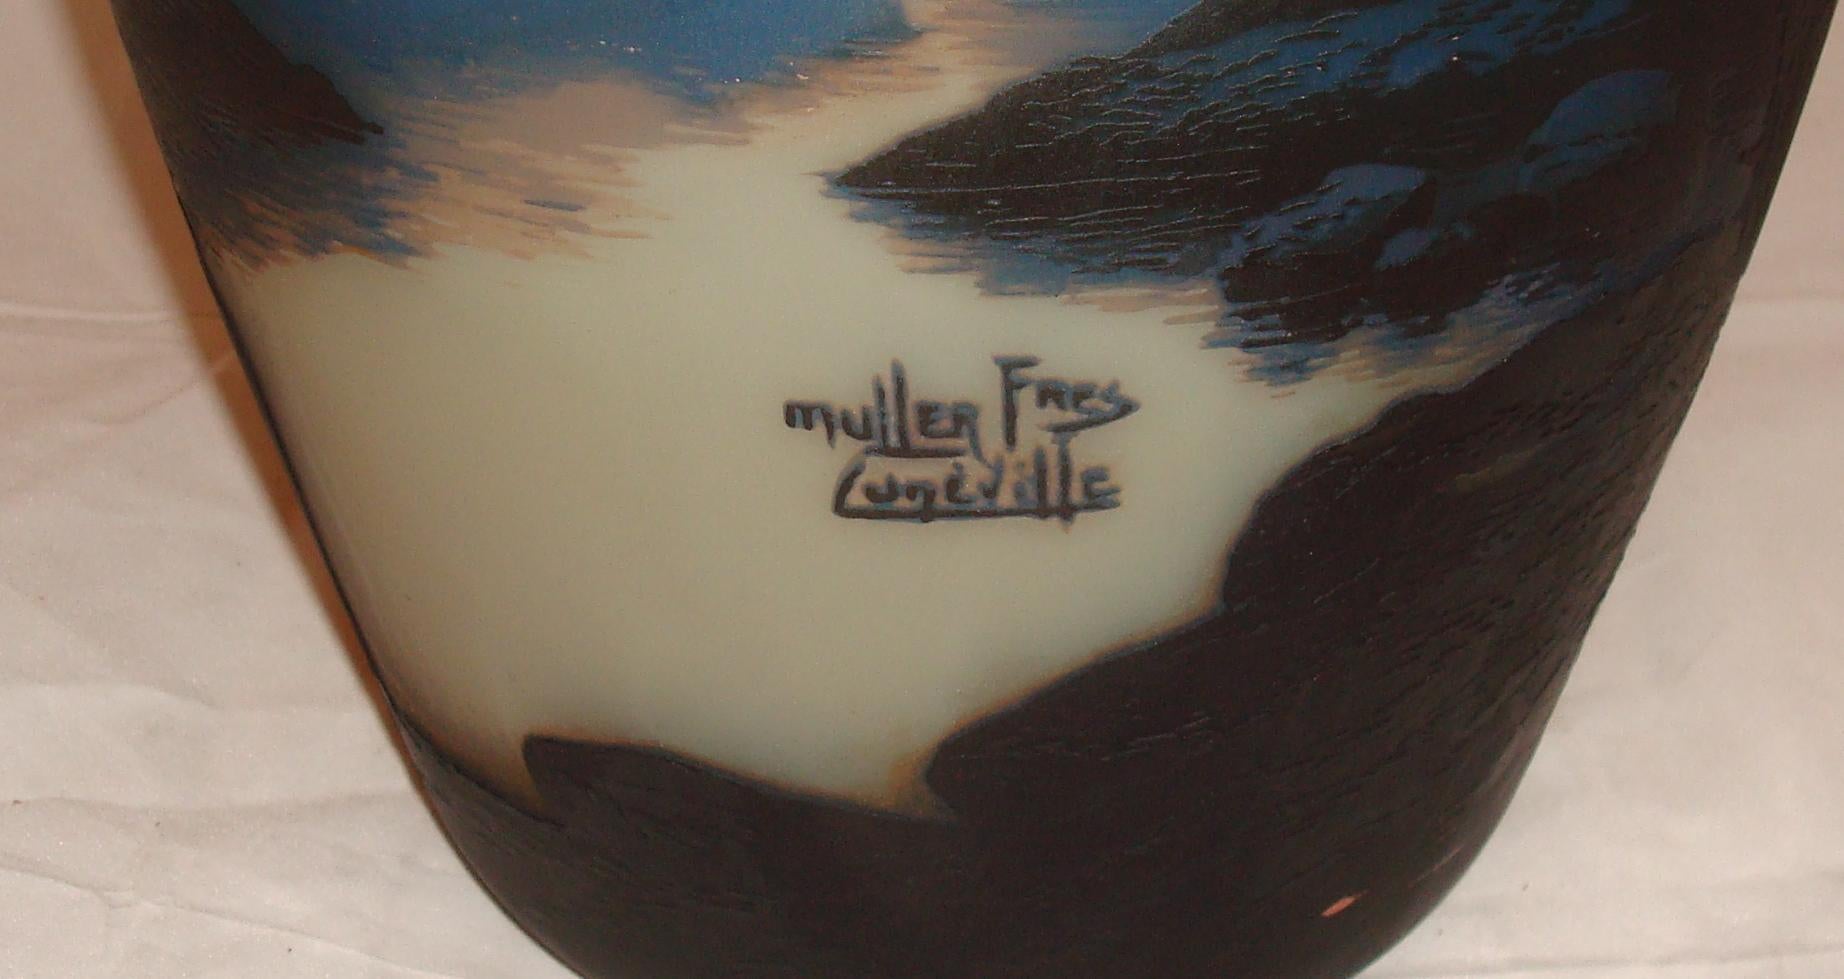 Vase Sign: Muller Fres Luneville
acid worked
Muller Feres
The heart of the company was formed by five brothers (Henri, Desire, Eugene, Pierre, Victor) from a glass making family who trained and worked at the Galle factory. Henri set up a decorating